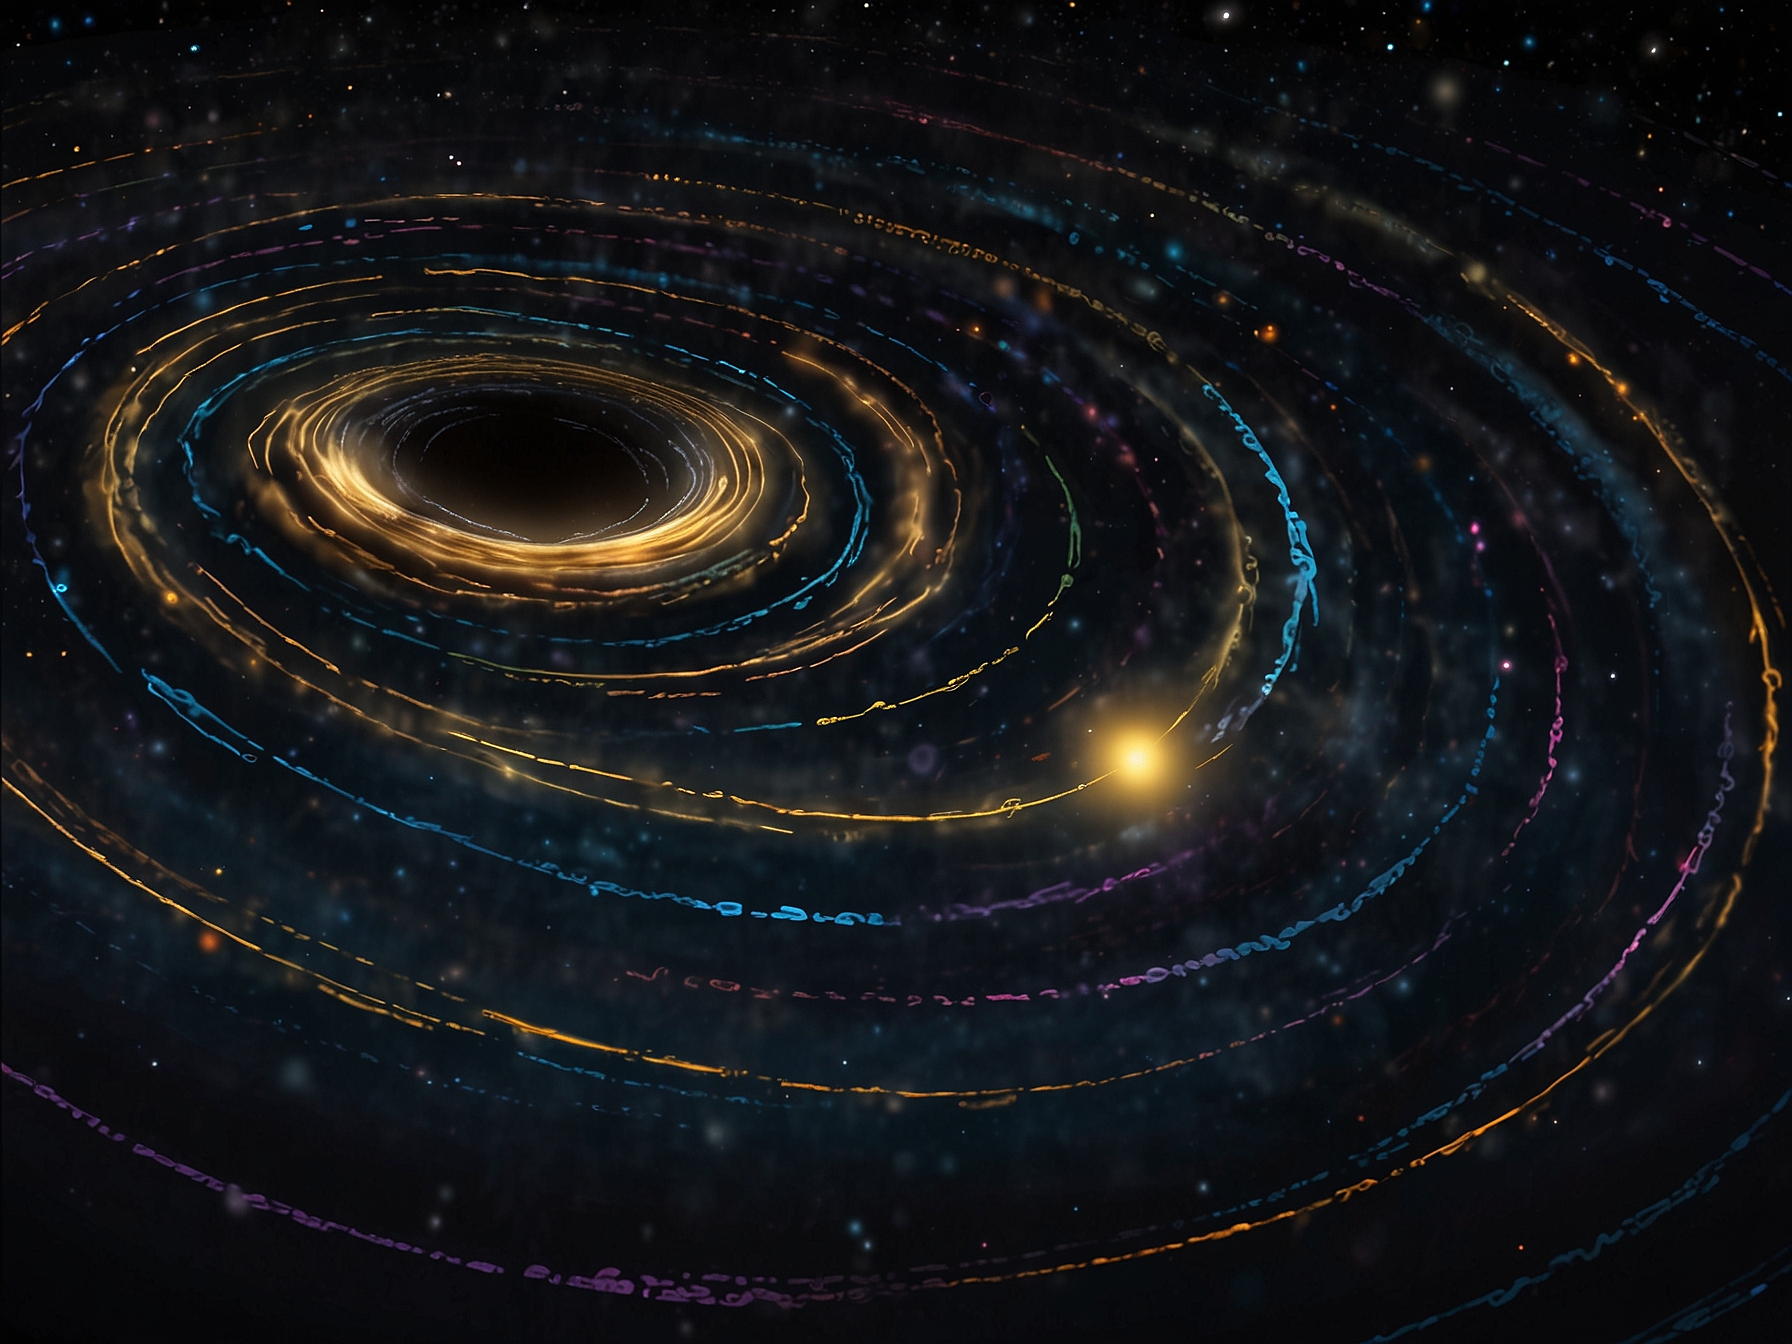 Depiction of the gravitational waves emitted from the OJ 287 binary black hole system. The illustration highlights the space-time ripples and the dynamic interactions between these colossal cosmic entities.